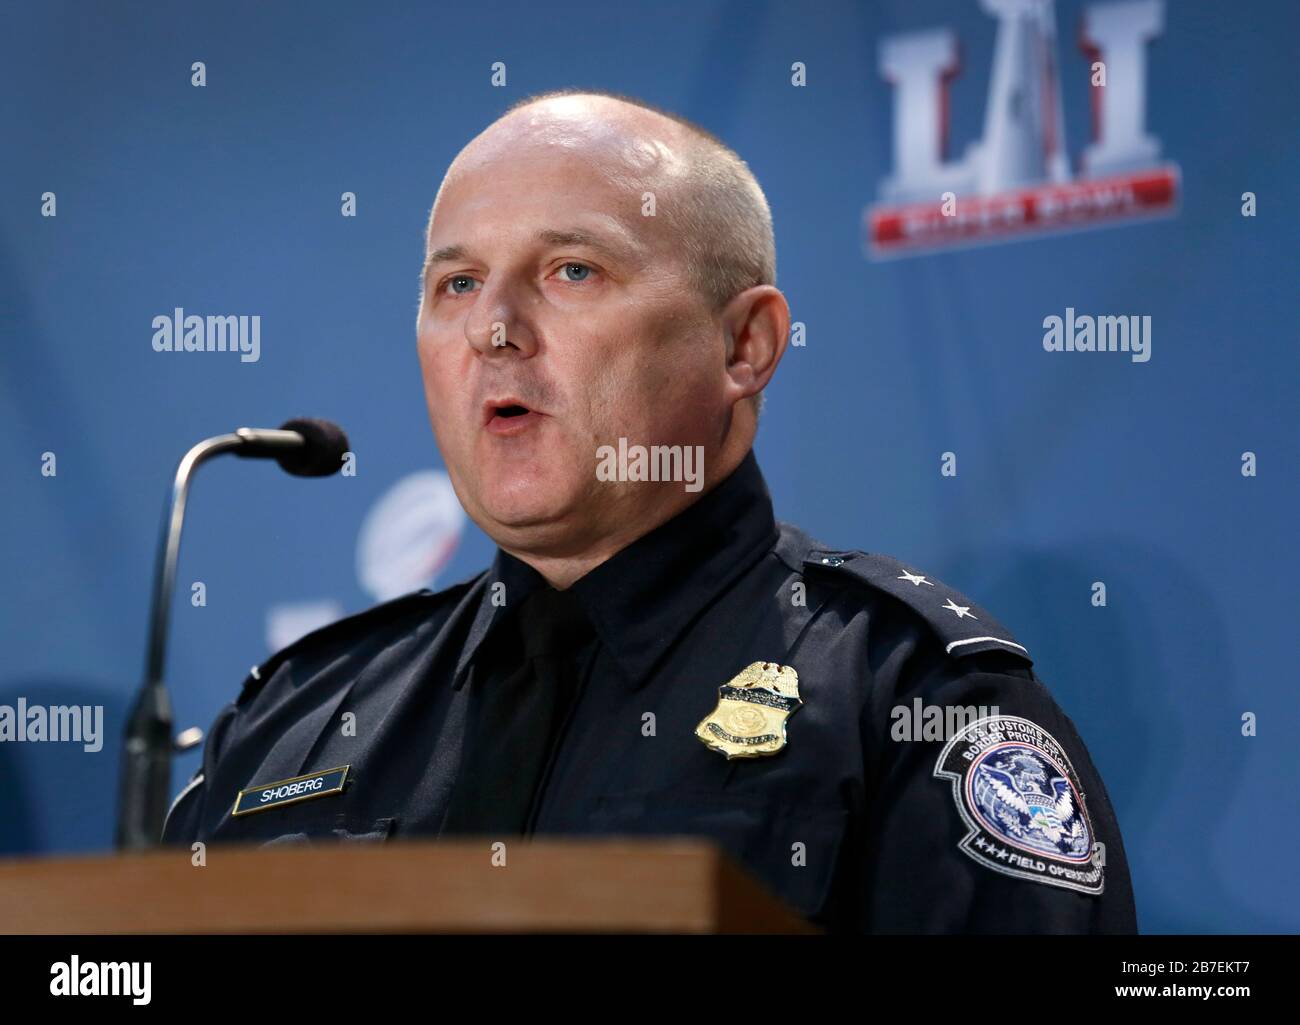 U.S. Customs and Border Protection Acting Director of Field Operations Erik Shoberg during a joint press conference on Operation Team Player at the George R. Brown Convention Center February 2, 2017 in Houston, Texas. Stock Photo